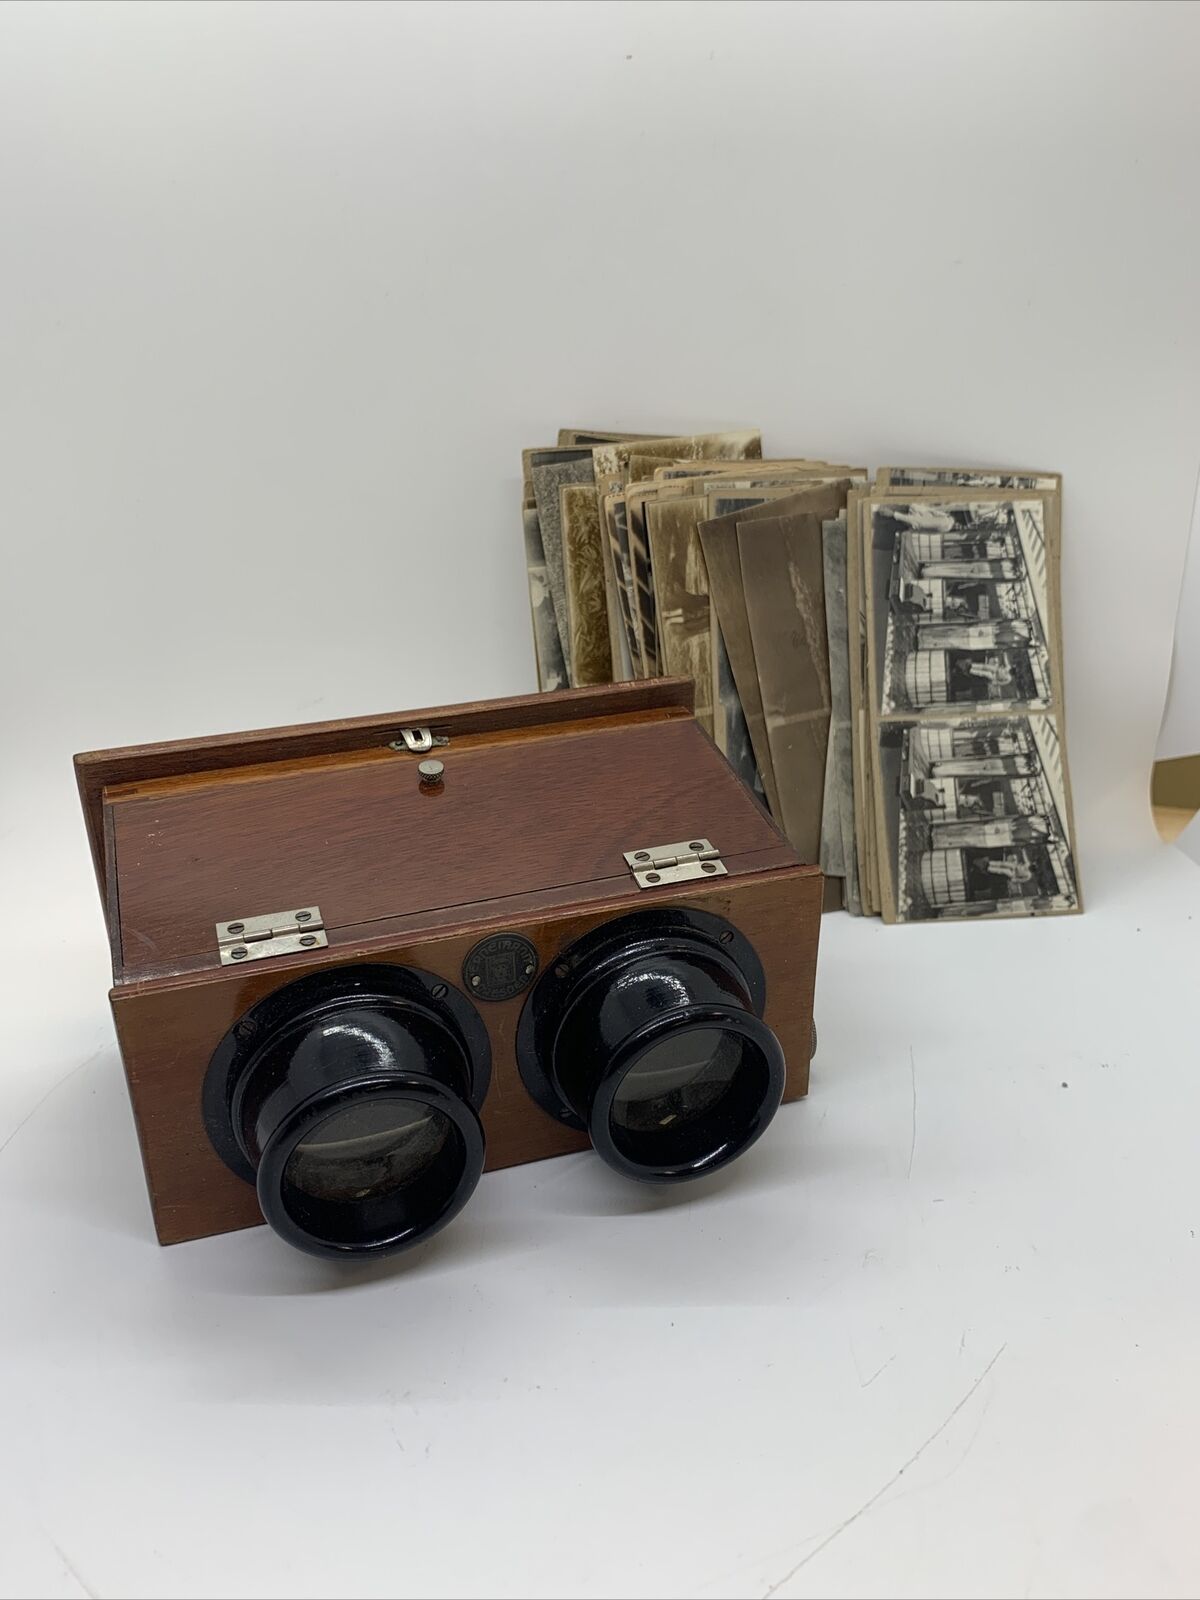 ERNEMANN Stereoscope Wood Wooden Viewer 1920\'s from Japan #2912 w/58 Cards